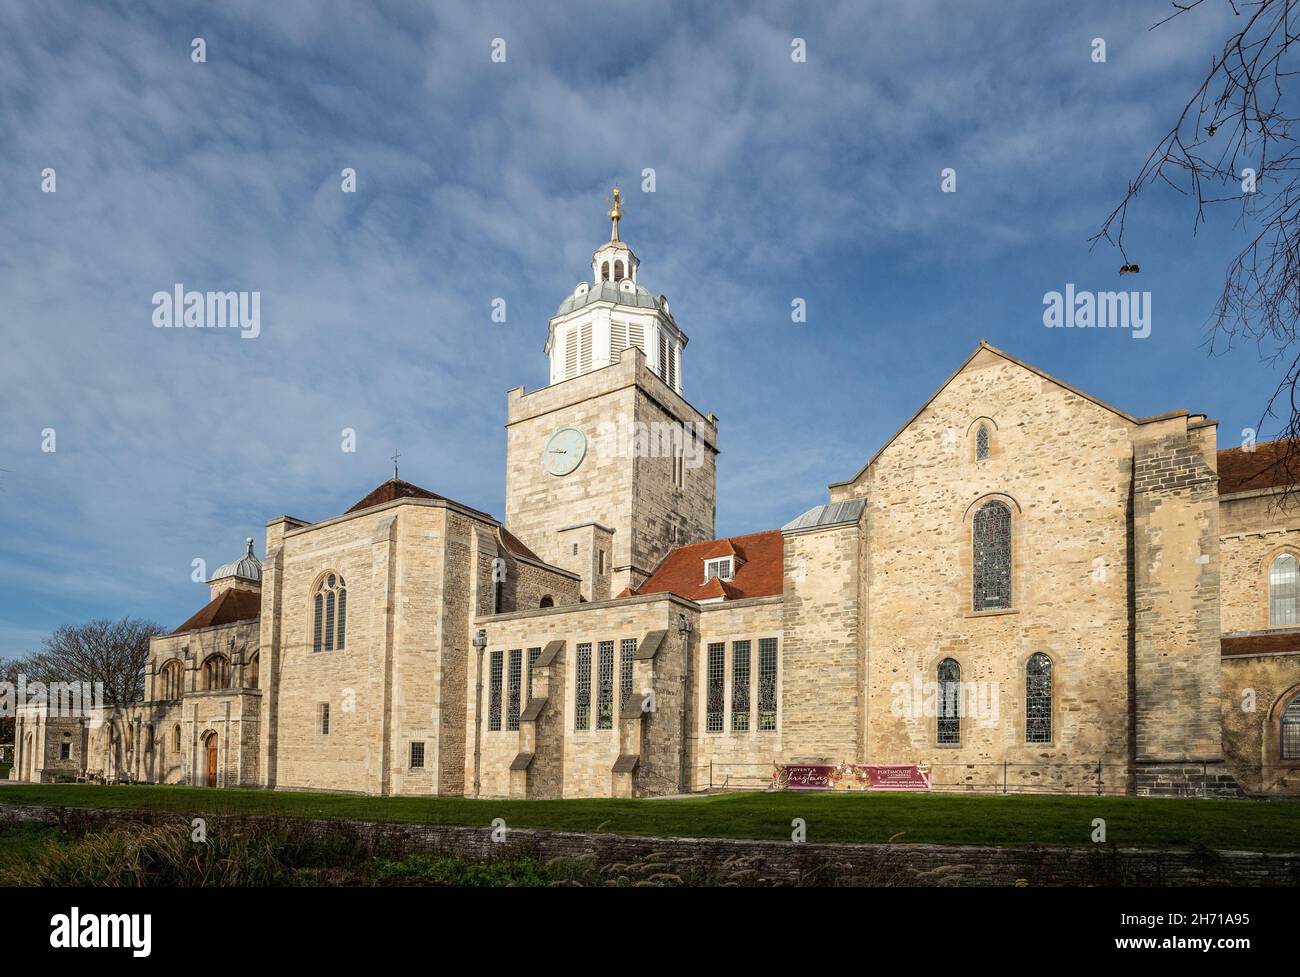 Portsmouth Cathedral pictured in Autumn, Portsmouth, Hampshire, UK Stock Photo